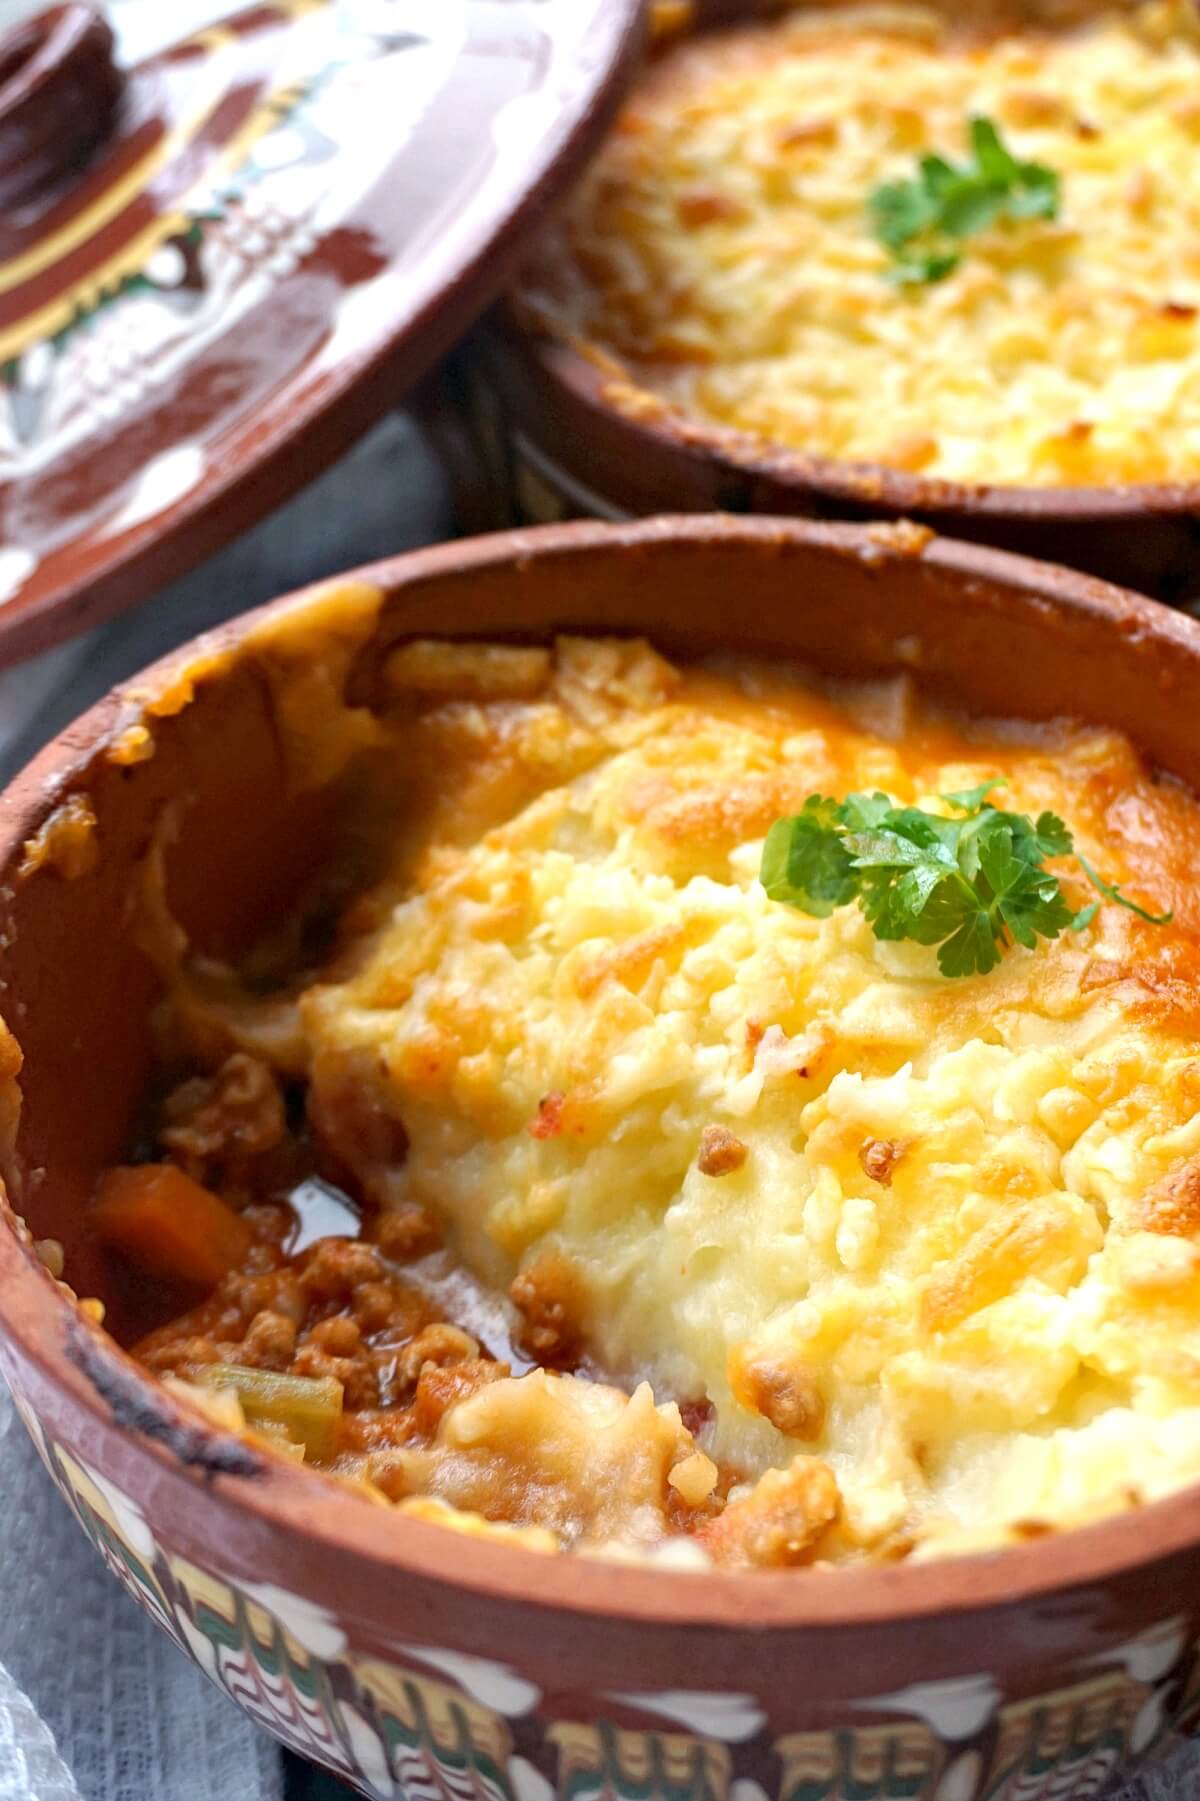 A dish with cottage pie.